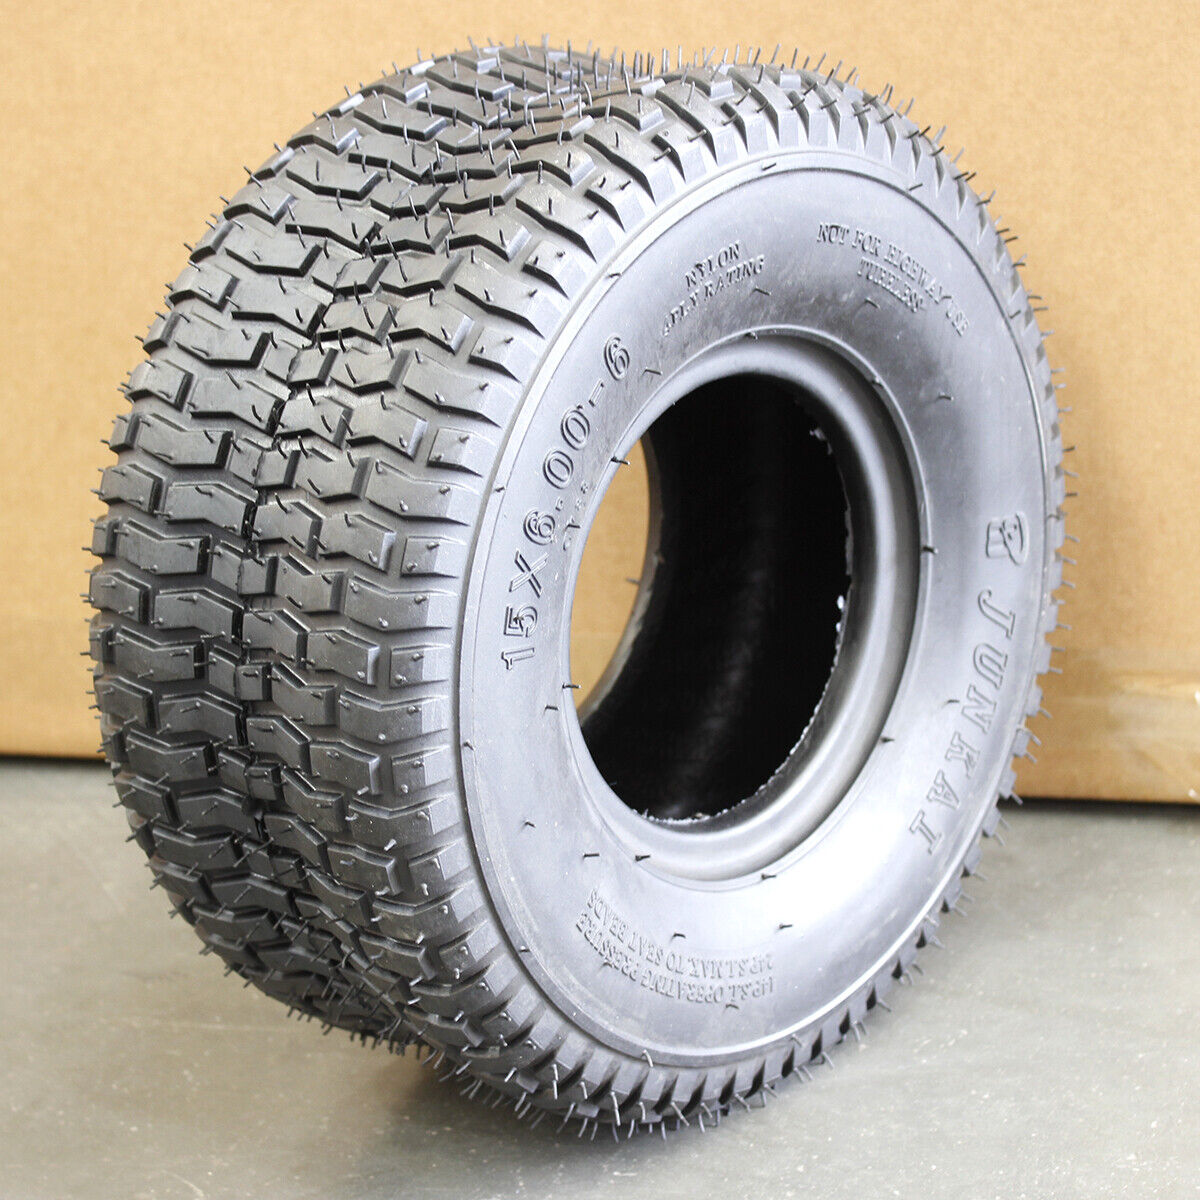 2x Ride on Mower Tyre 4 Ply Turf 15 x 6.00 - 6" inch Commercial Tubeless Tire